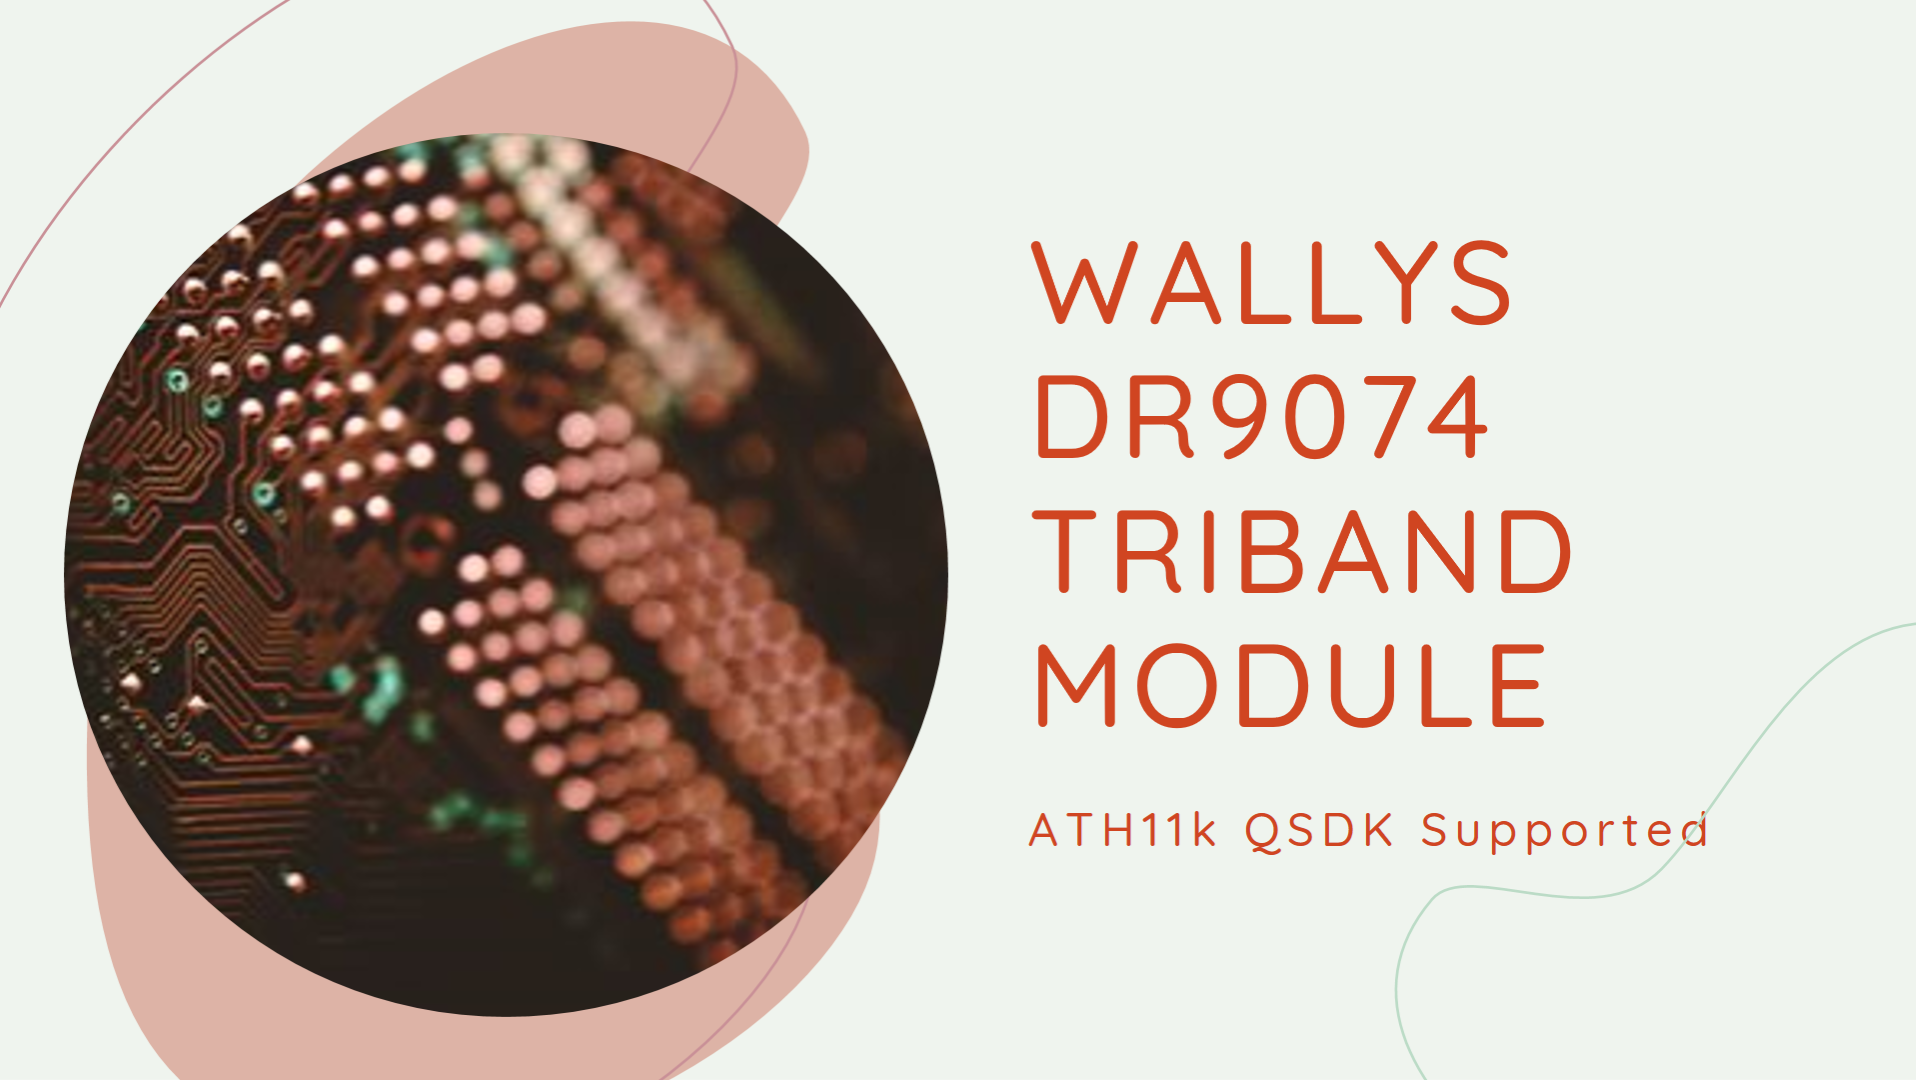 QCN9024 and QCN9074: Wallys DR9074 Triband Module ATH11k QSDK Supported